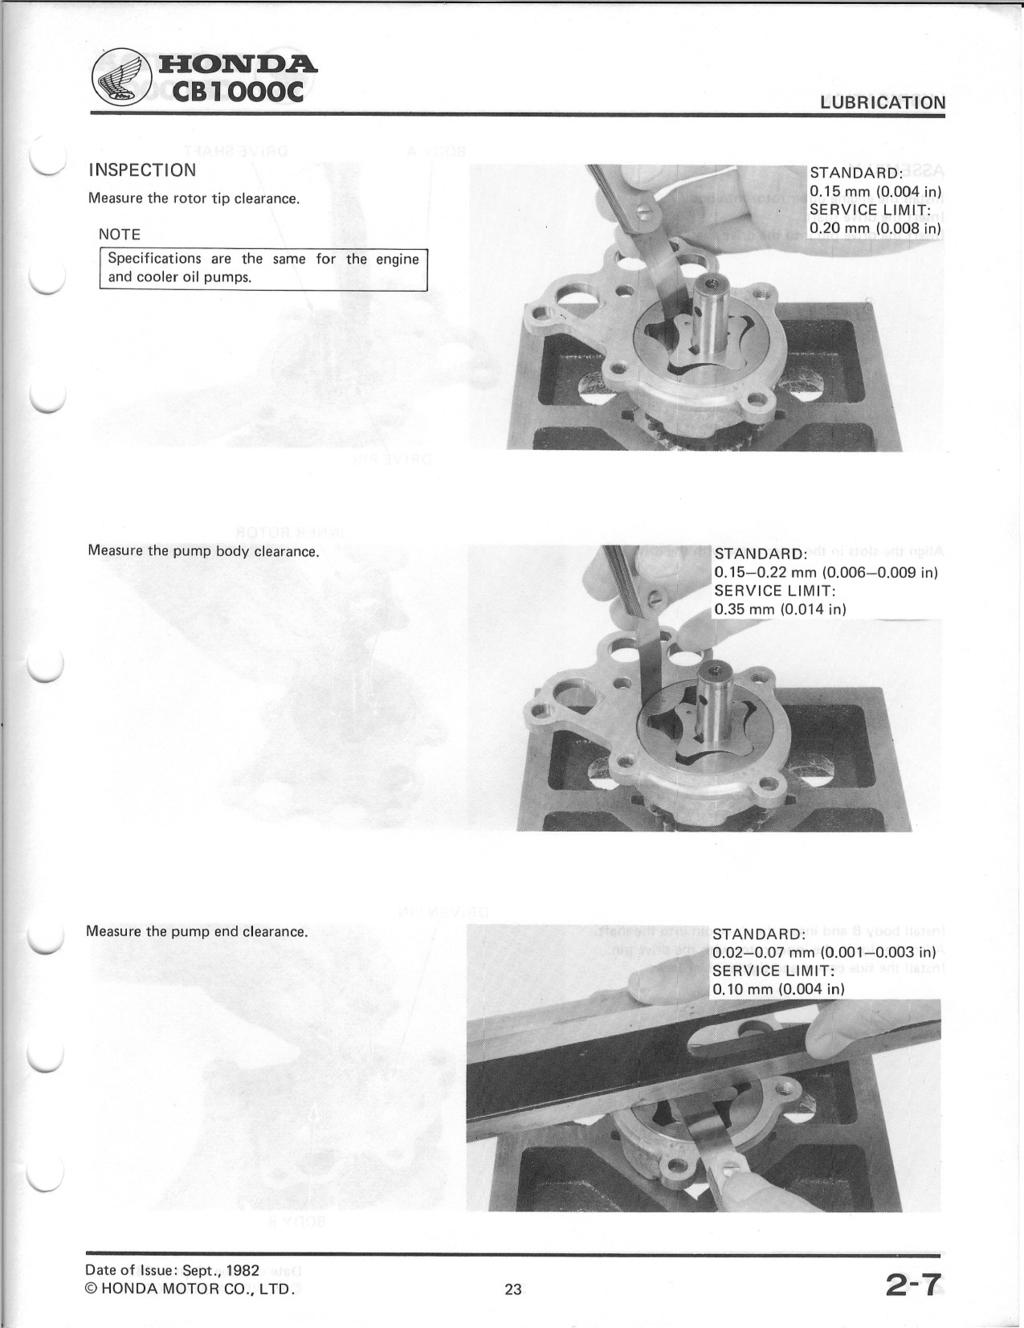 ~HON'DA~ CB1000C LUBRICATION ~ INSPECTION Measure the rotor tip clearance. NOTE STANDARD: 0.15 mm (0.004 in) SERVICE LIMIT: 0.20 mm (0.